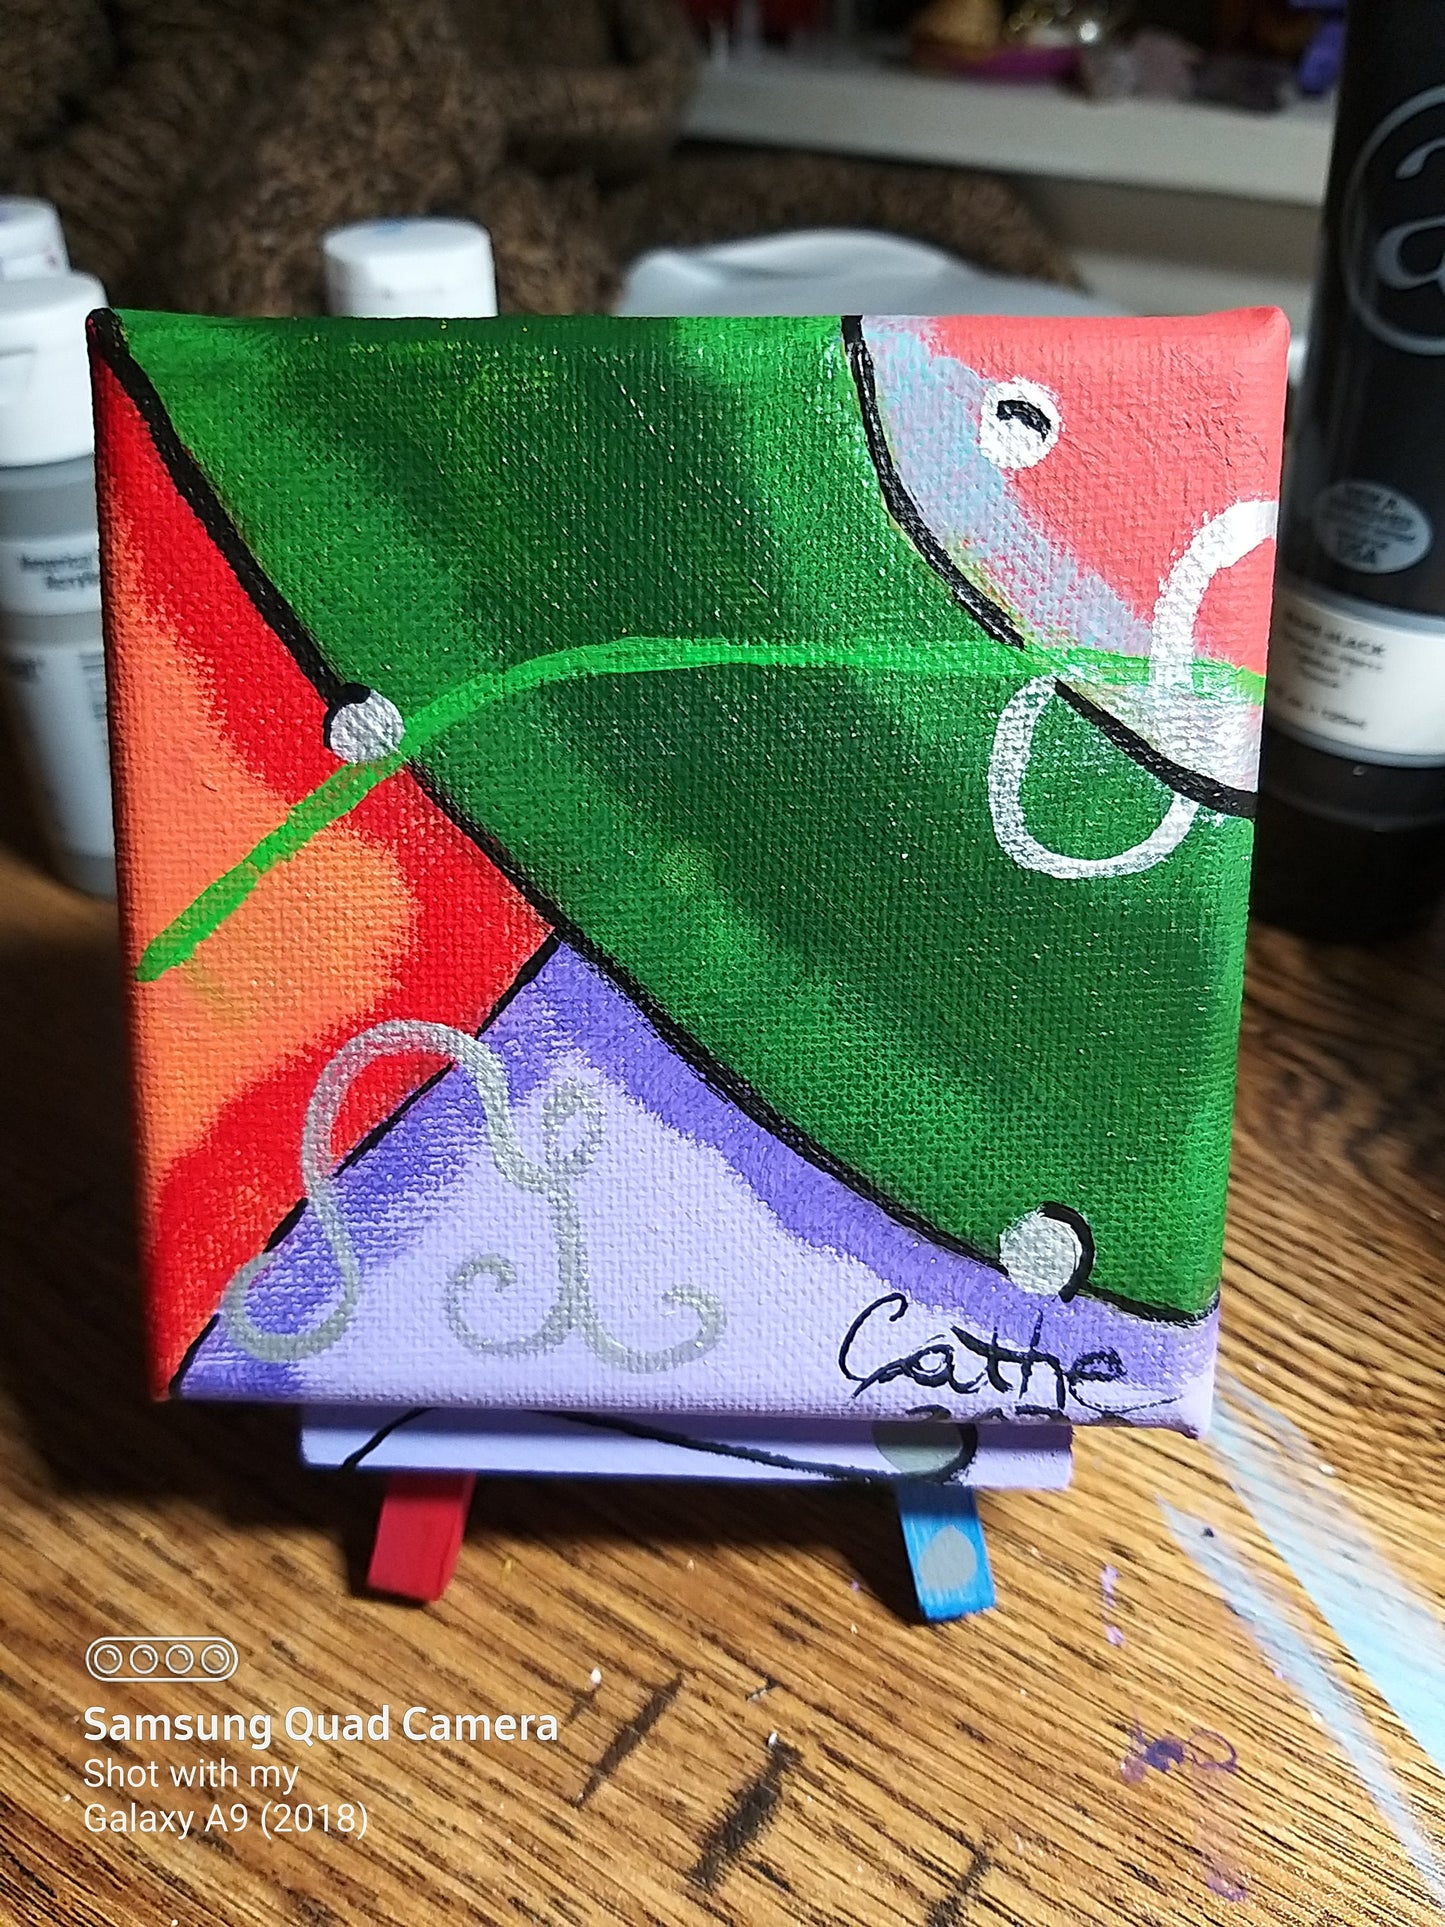 Acrylic Abstract Art - Tiny Art for Tiny Houses - 'Graphic Design 2' with Green, Red, and Purple Mini Abstract Painting